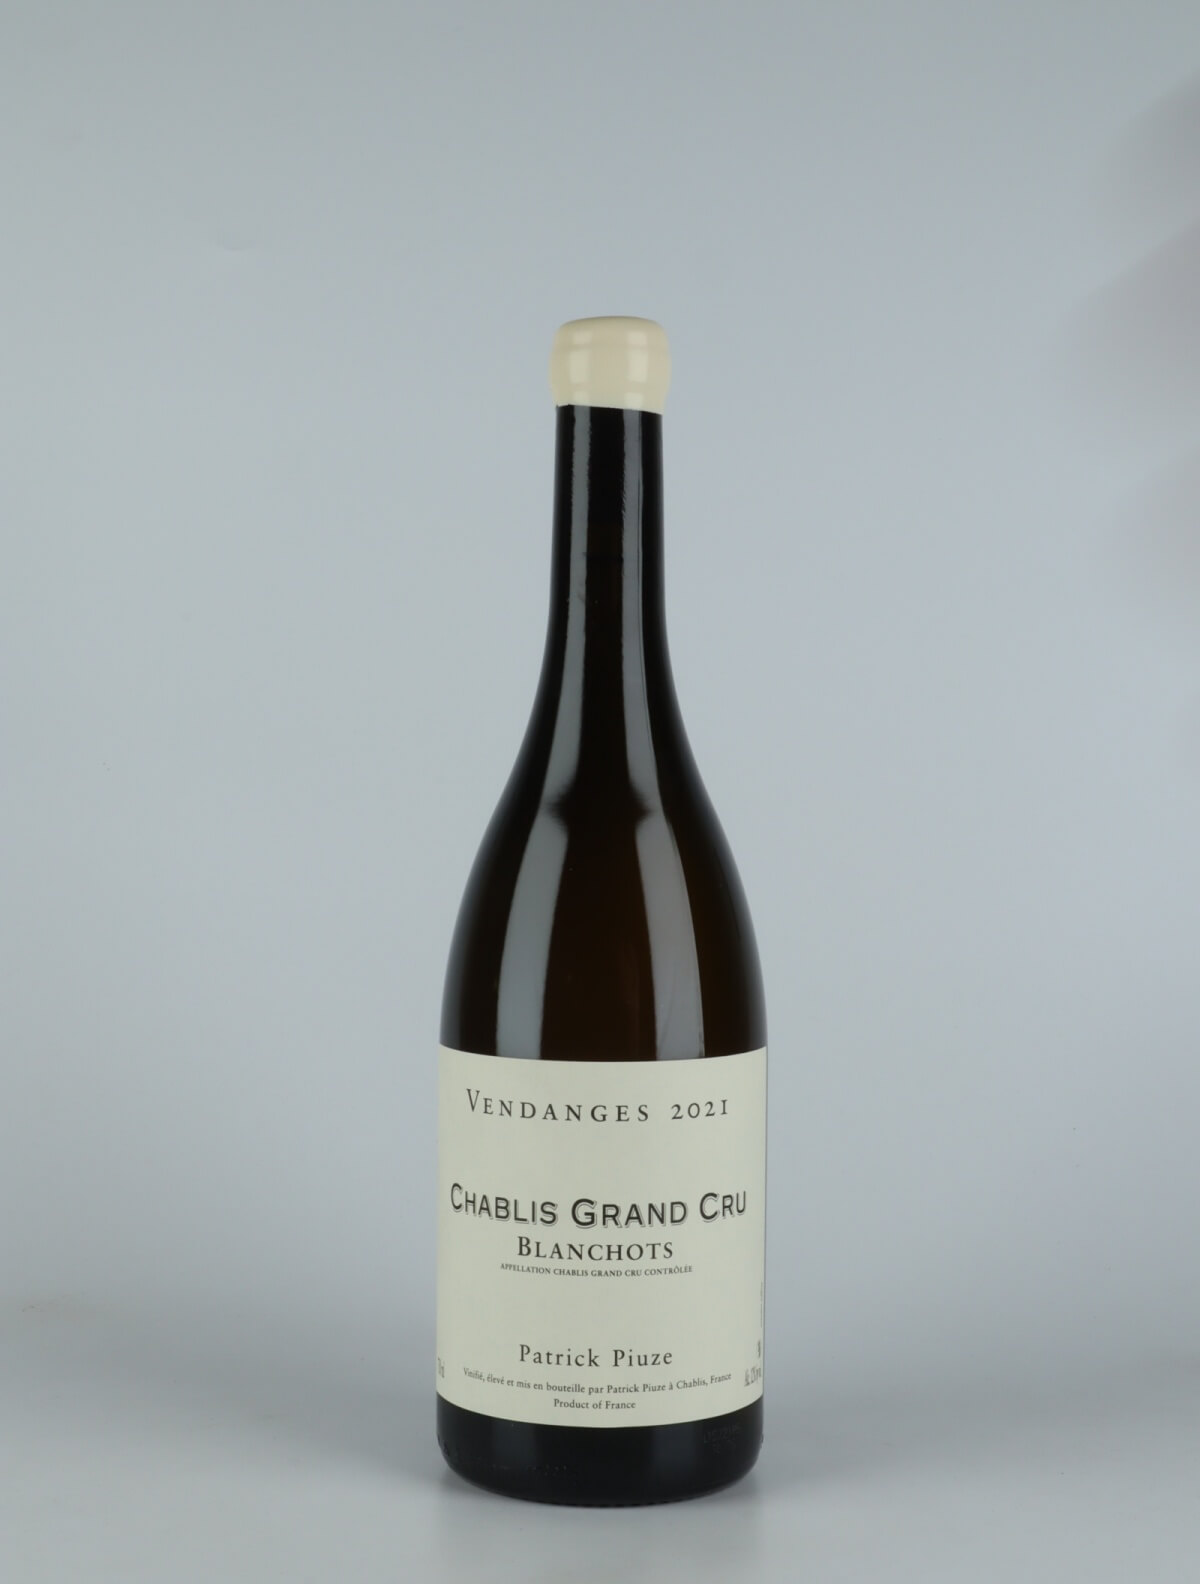 A bottle 2021 Chablis Grand Cru - Blanchots White wine from Patrick Piuze, Burgundy in France